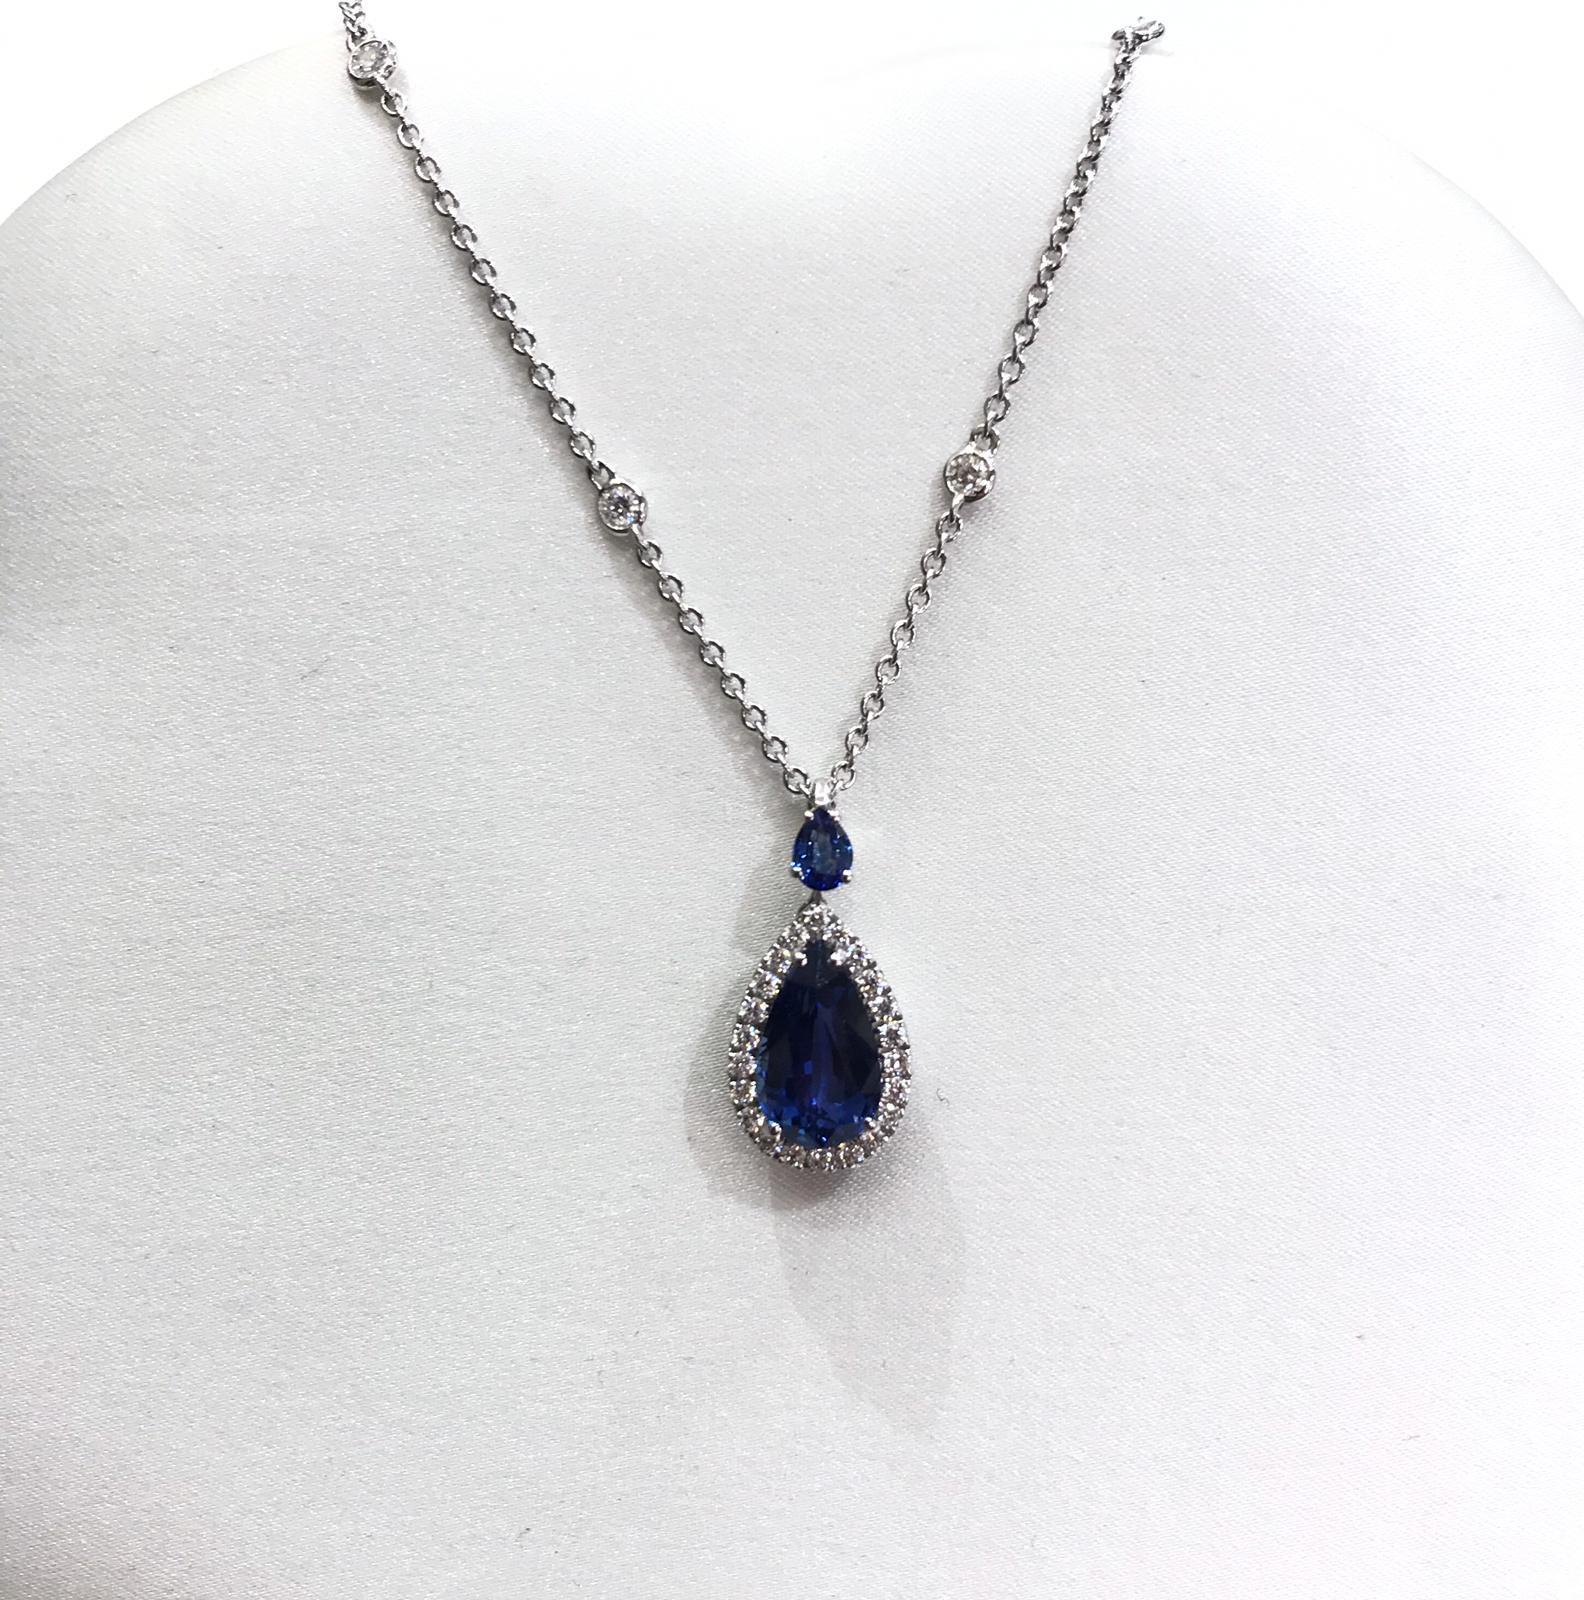 Contemporary Pendant Drop Sapphire Necklace with Diamonds and Pear Cut Sapphire on Top